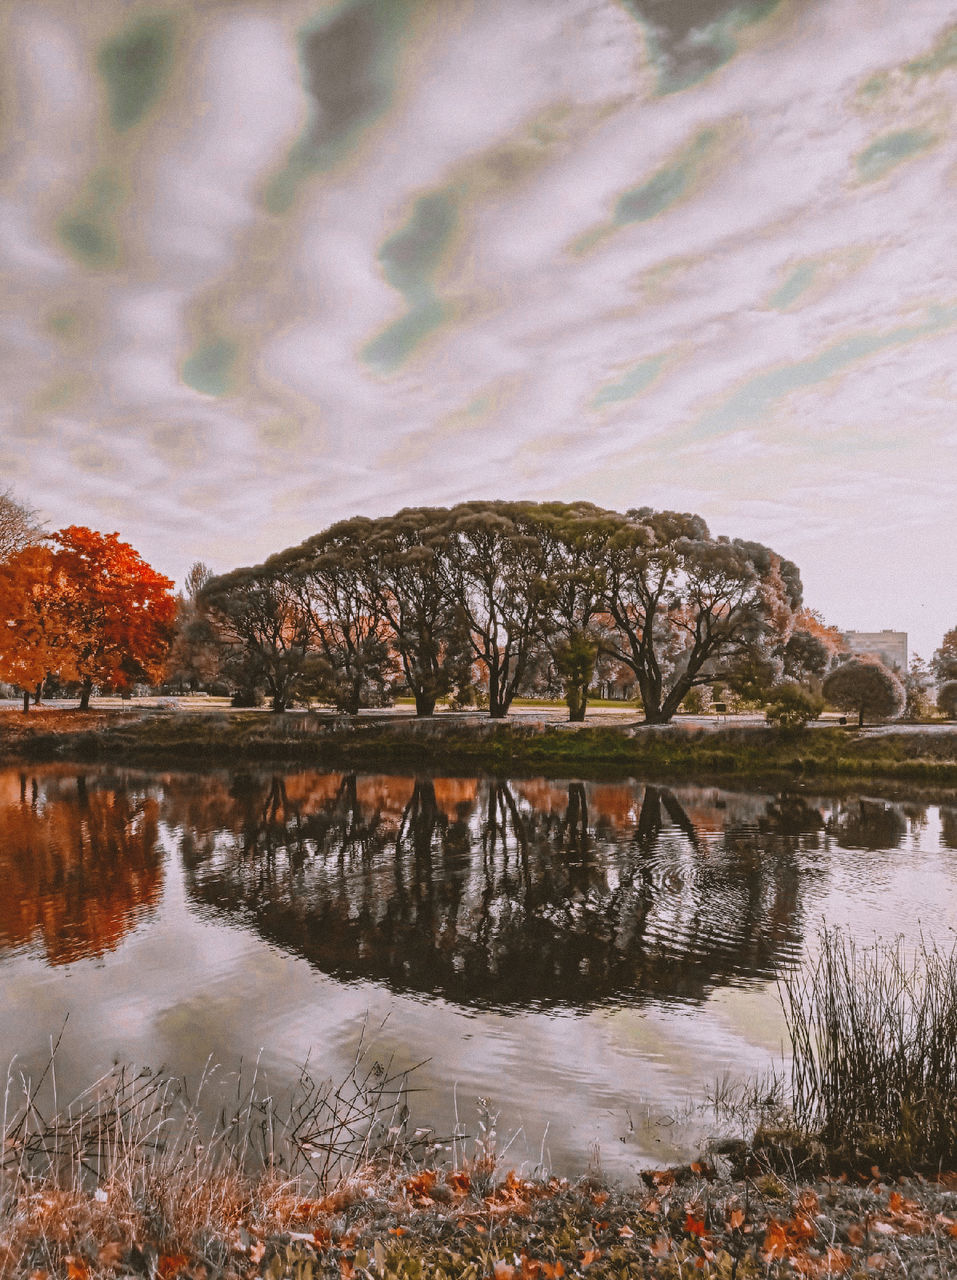 reflection, water, nature, sky, beauty in nature, cloud, morning, lake, environment, tree, scenics - nature, plant, autumn, landscape, no people, tranquility, travel destinations, land, outdoors, tranquil scene, travel, tourism, leaf, non-urban scene, shore, day